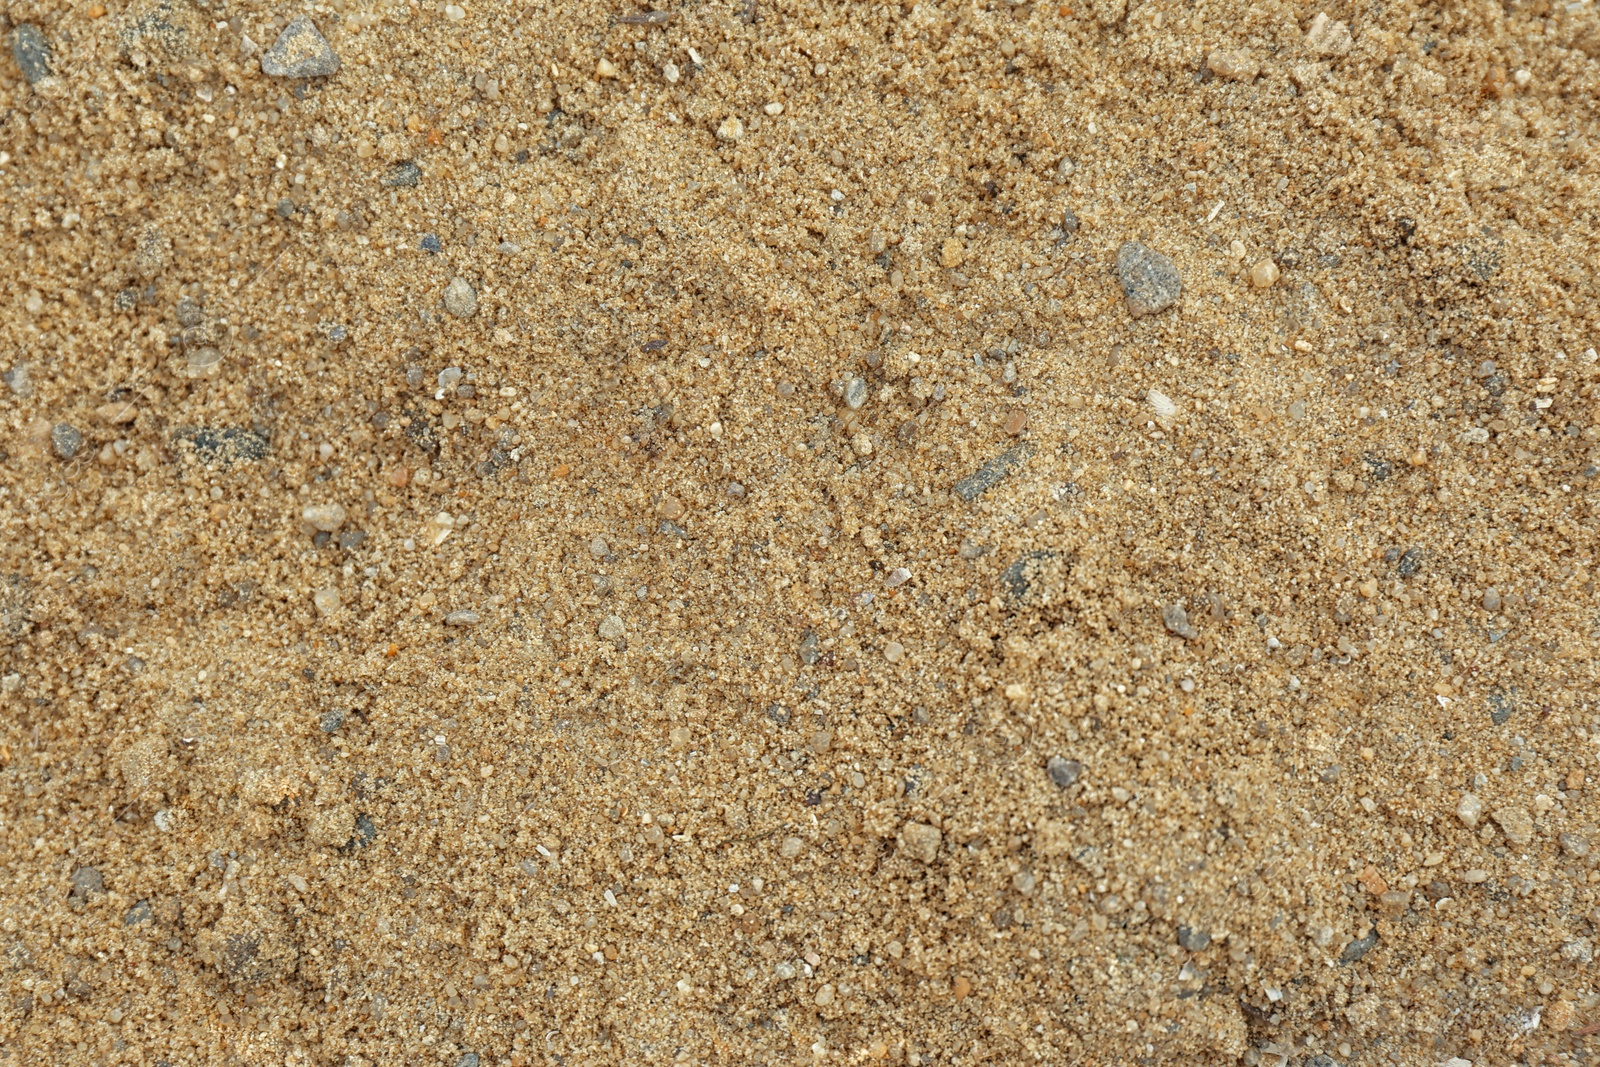 Photo of Textured sandy soil surface as background, top view